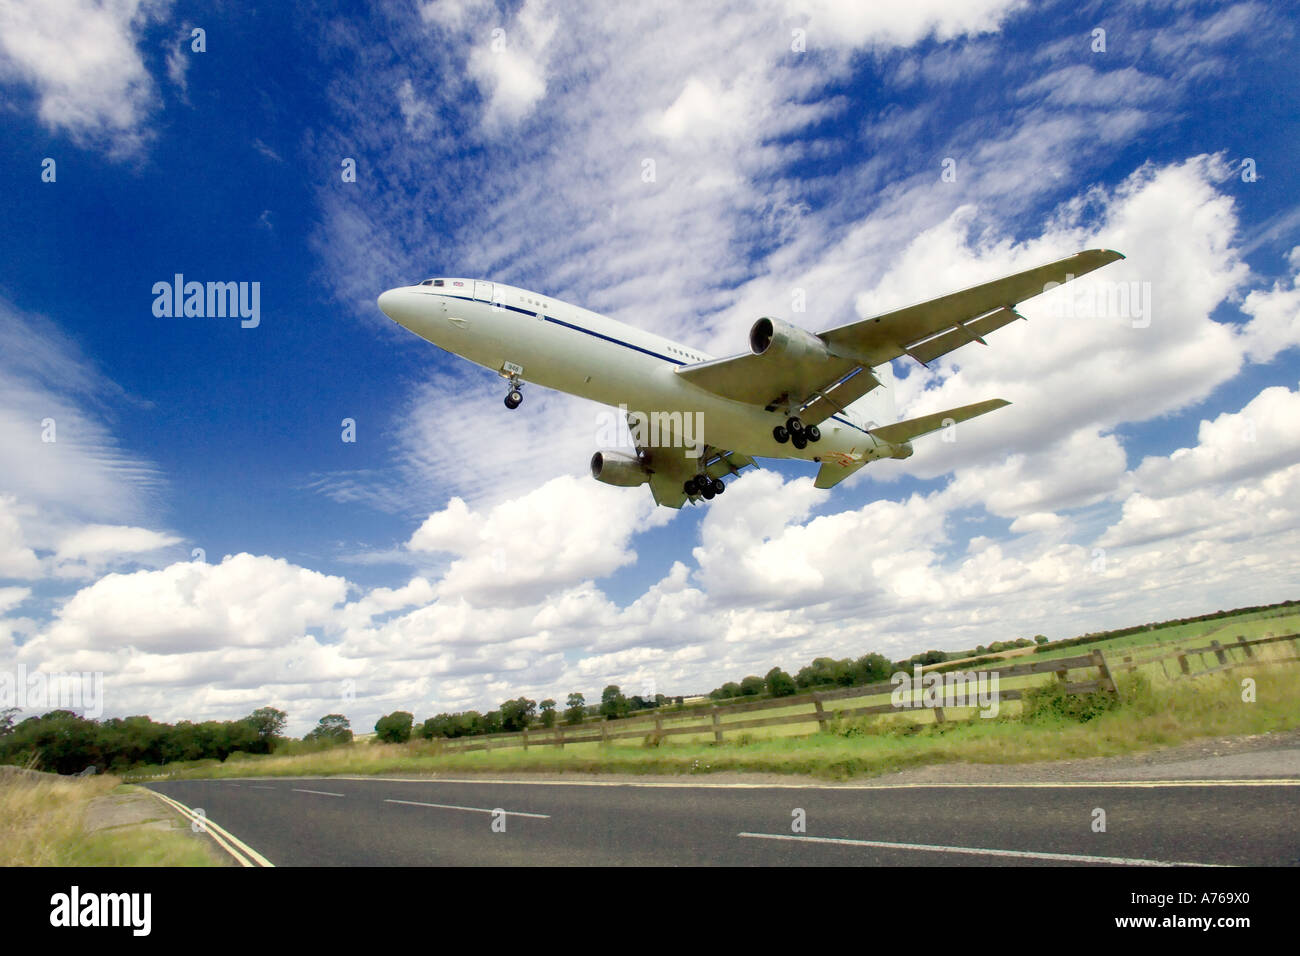 Close up wide view of an aircraft landing at an airport with the flaps, landing gear down and the ground in view. Stock Photo